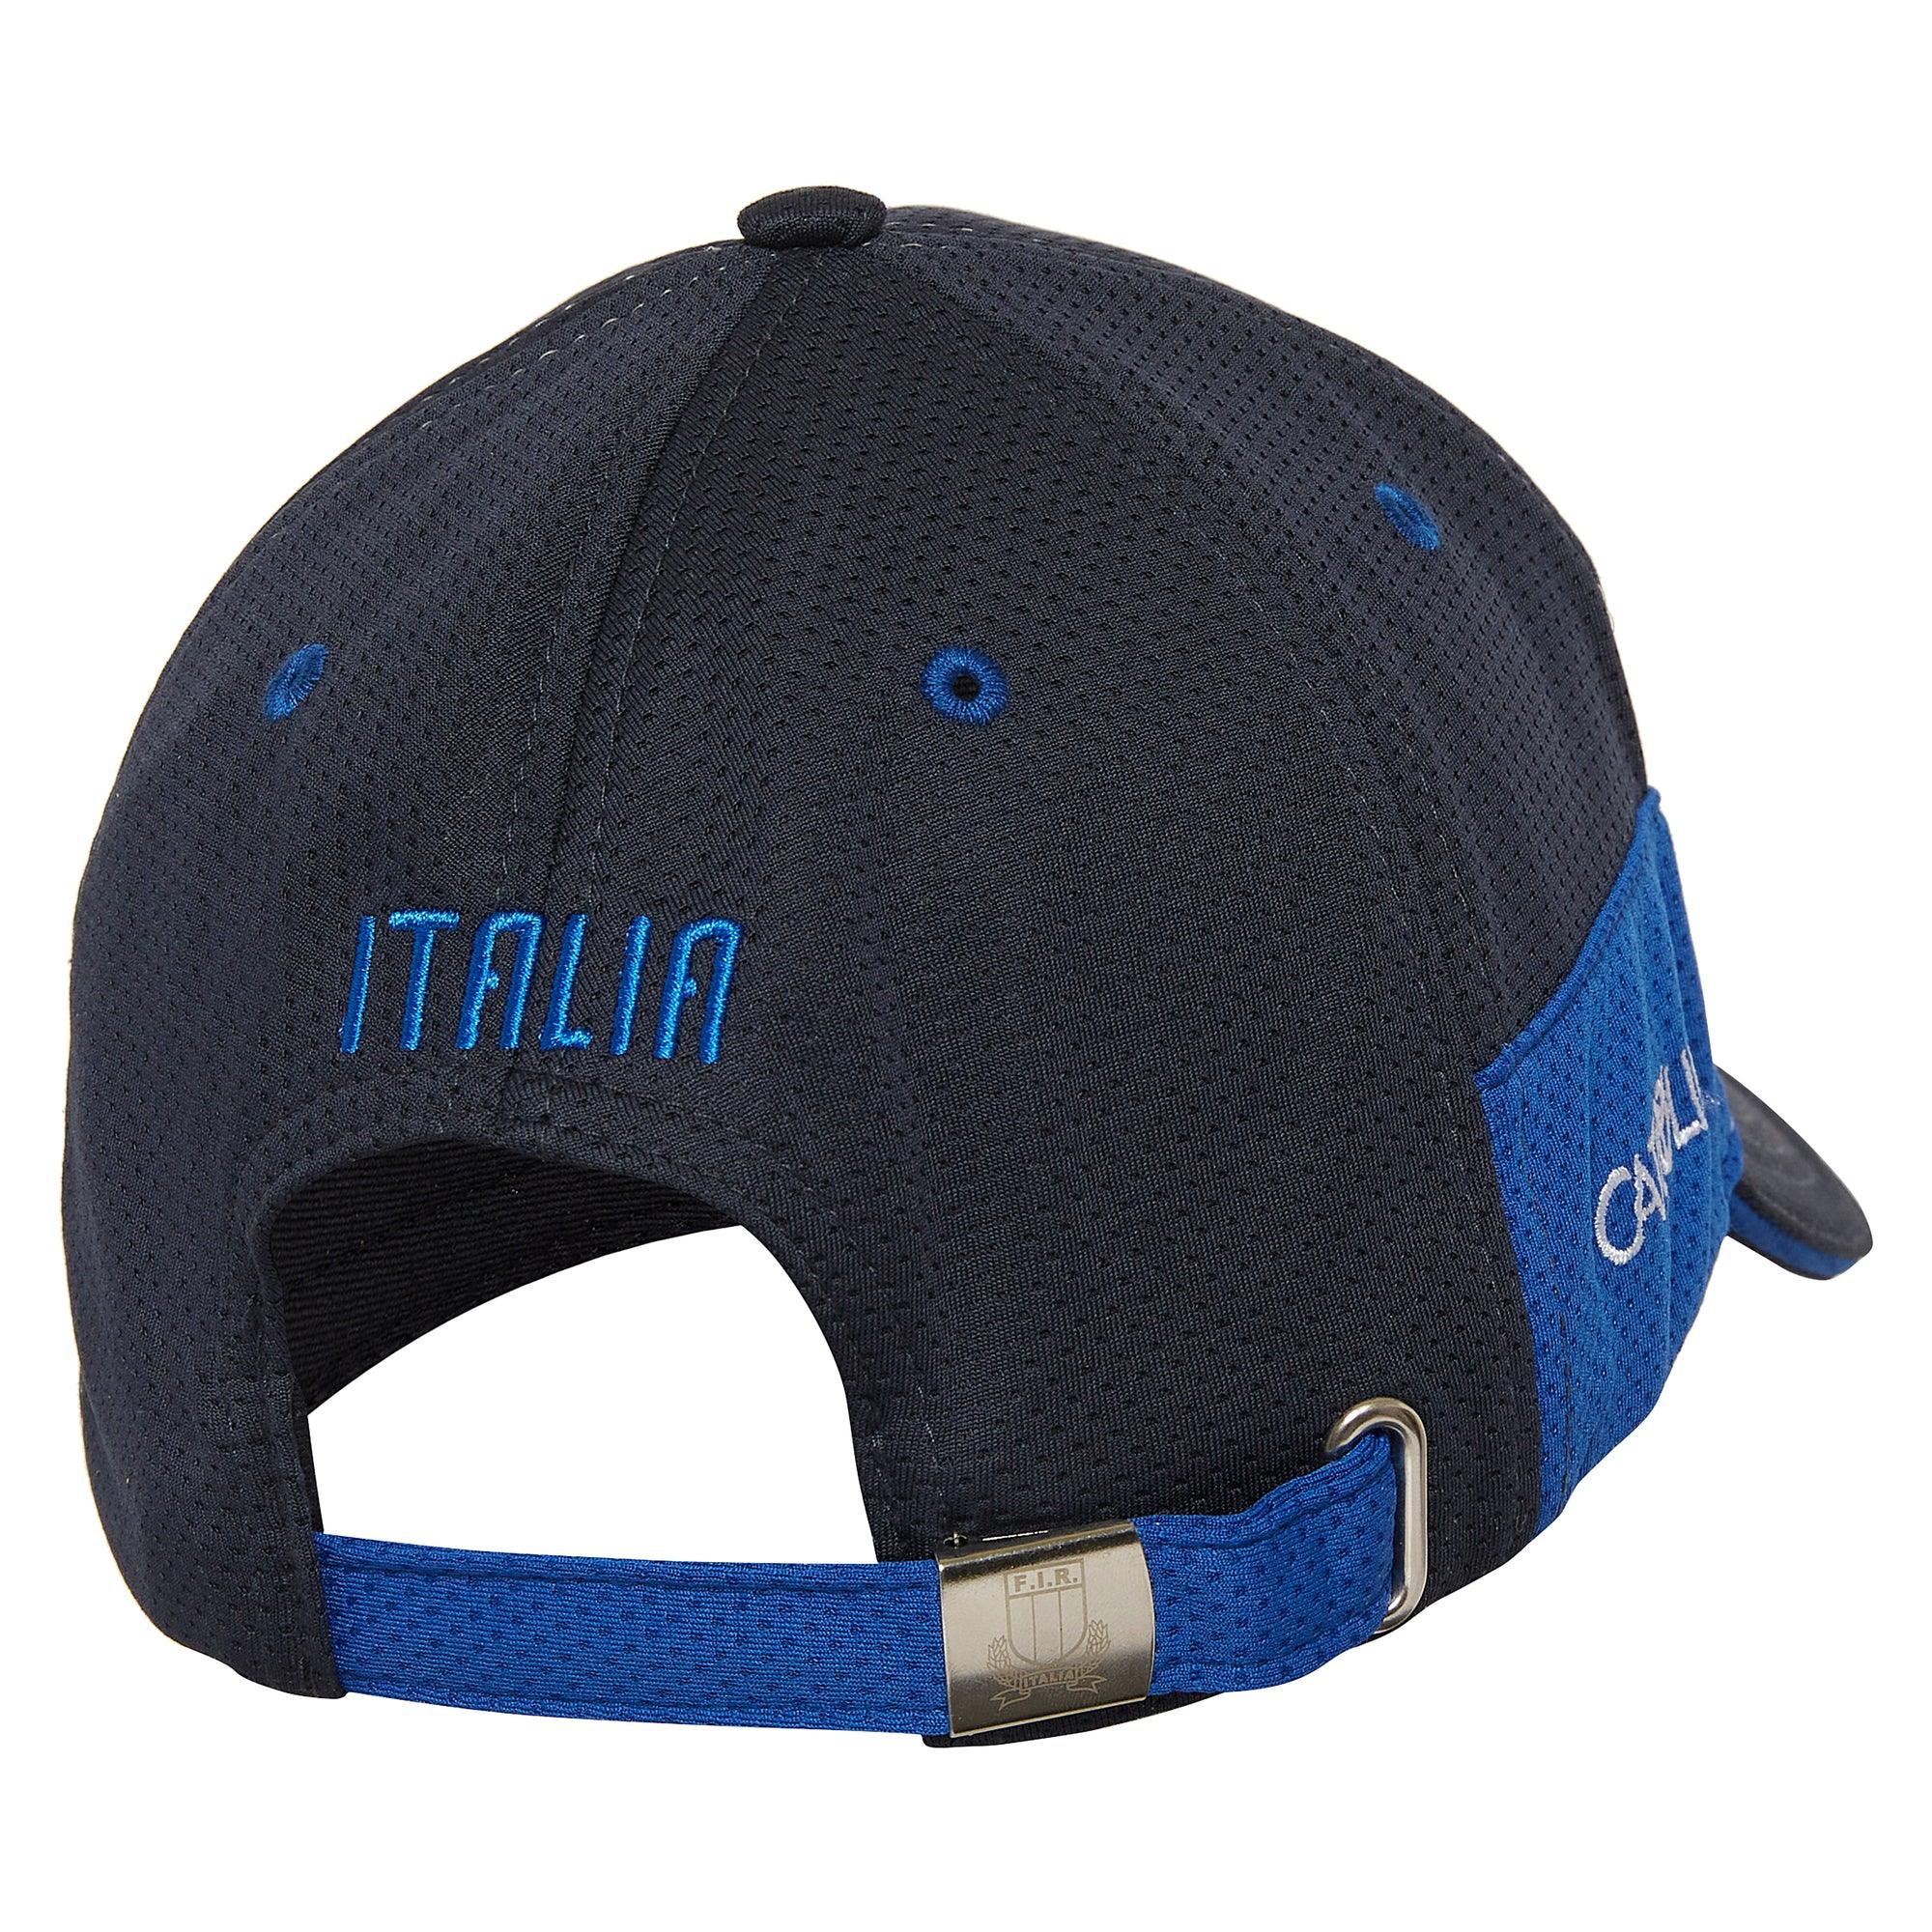 Italy Cap - The Rugby Shop Darwin